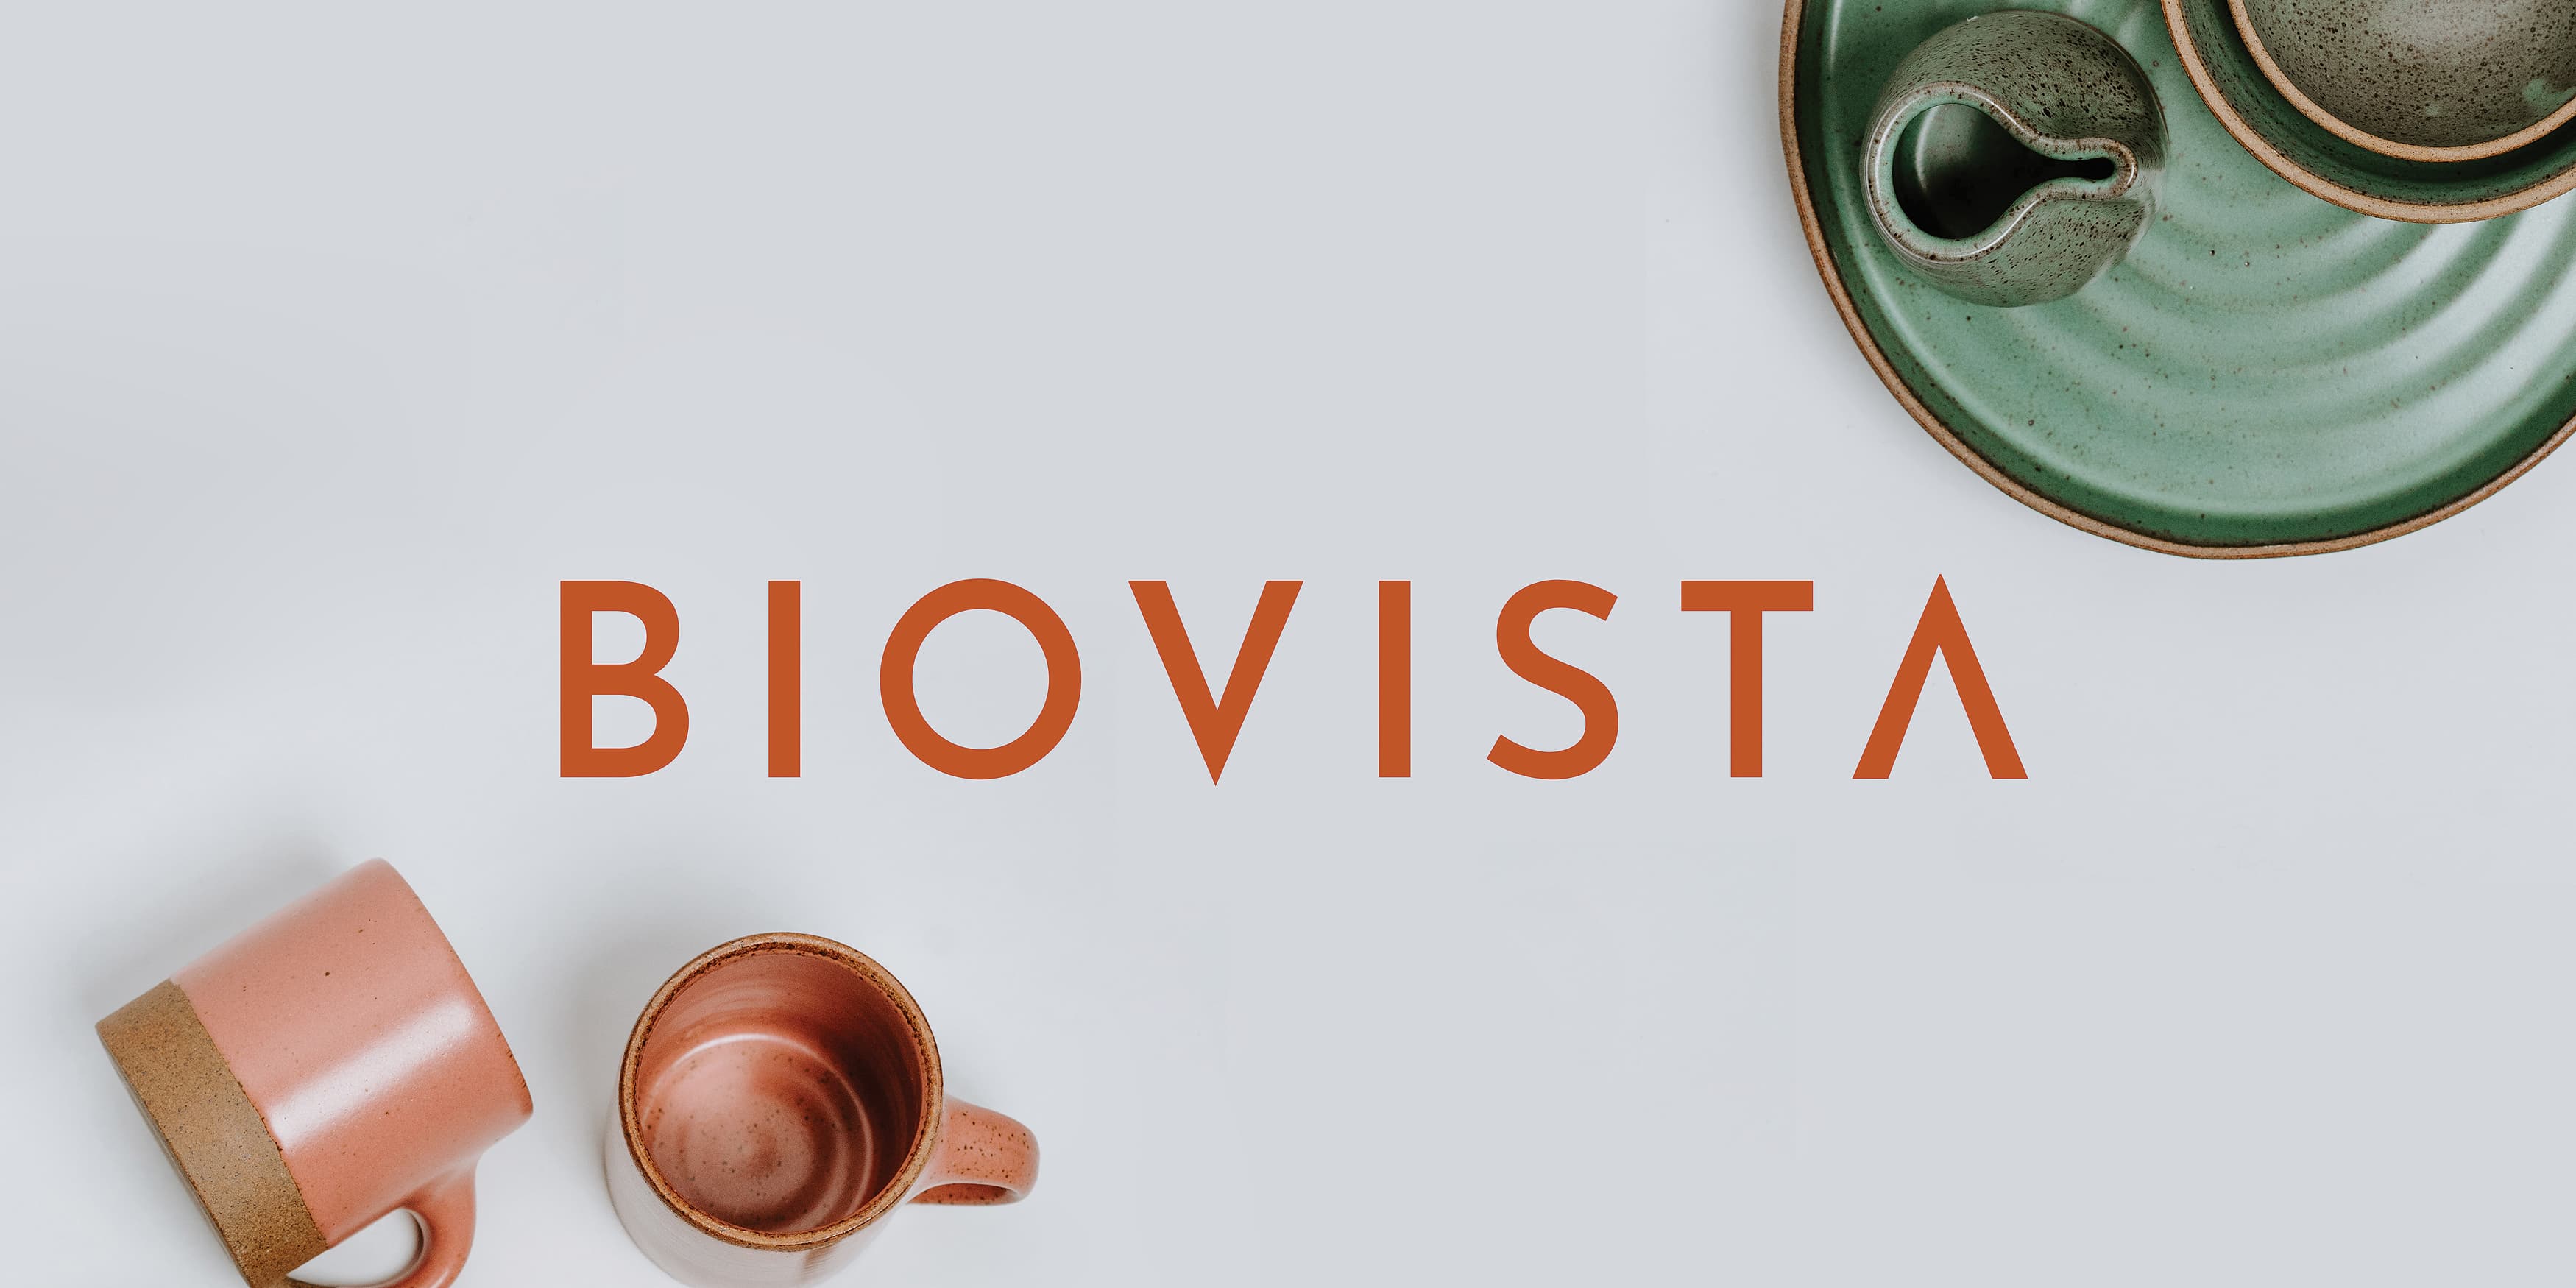 Image showcasing the BioVista primary logo in a rust coral color on a simple grey background with ceramic mugs and dishes on the corners. Branding for Biovista by RSM Design.